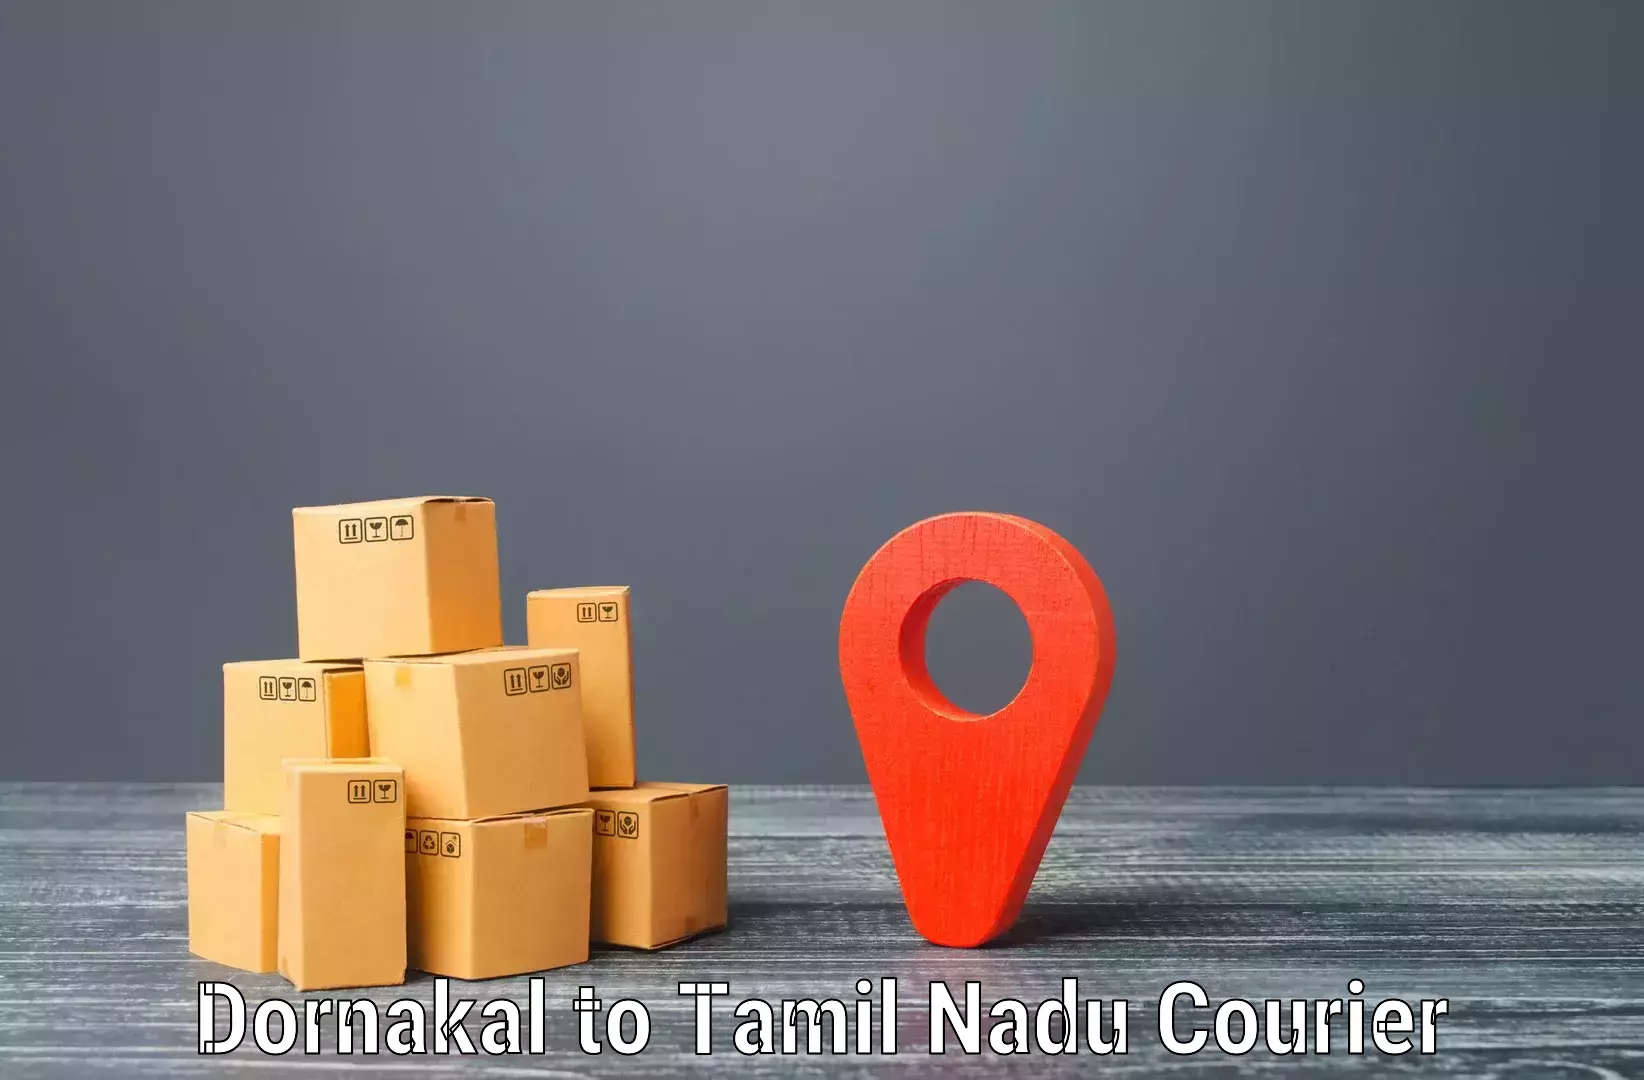 24-hour courier service Dornakal to Kuttanur